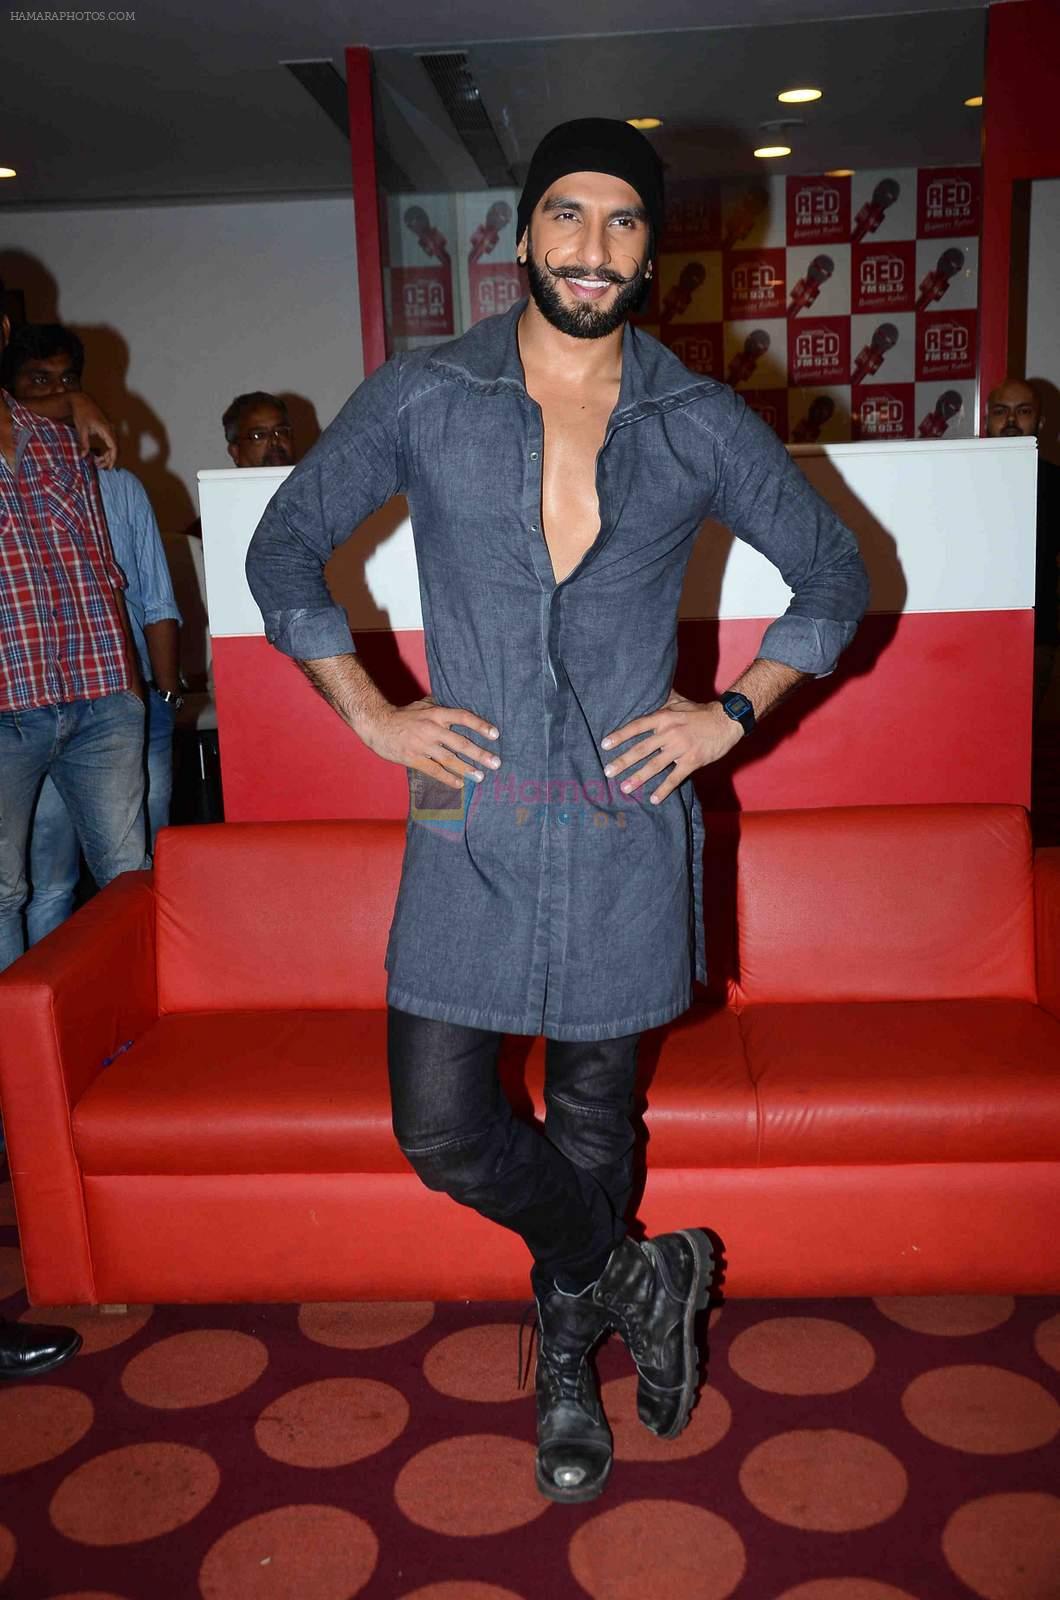 Ranveer Singh at Bajirao Mastani promotions at red fm on 9th Dec 2015